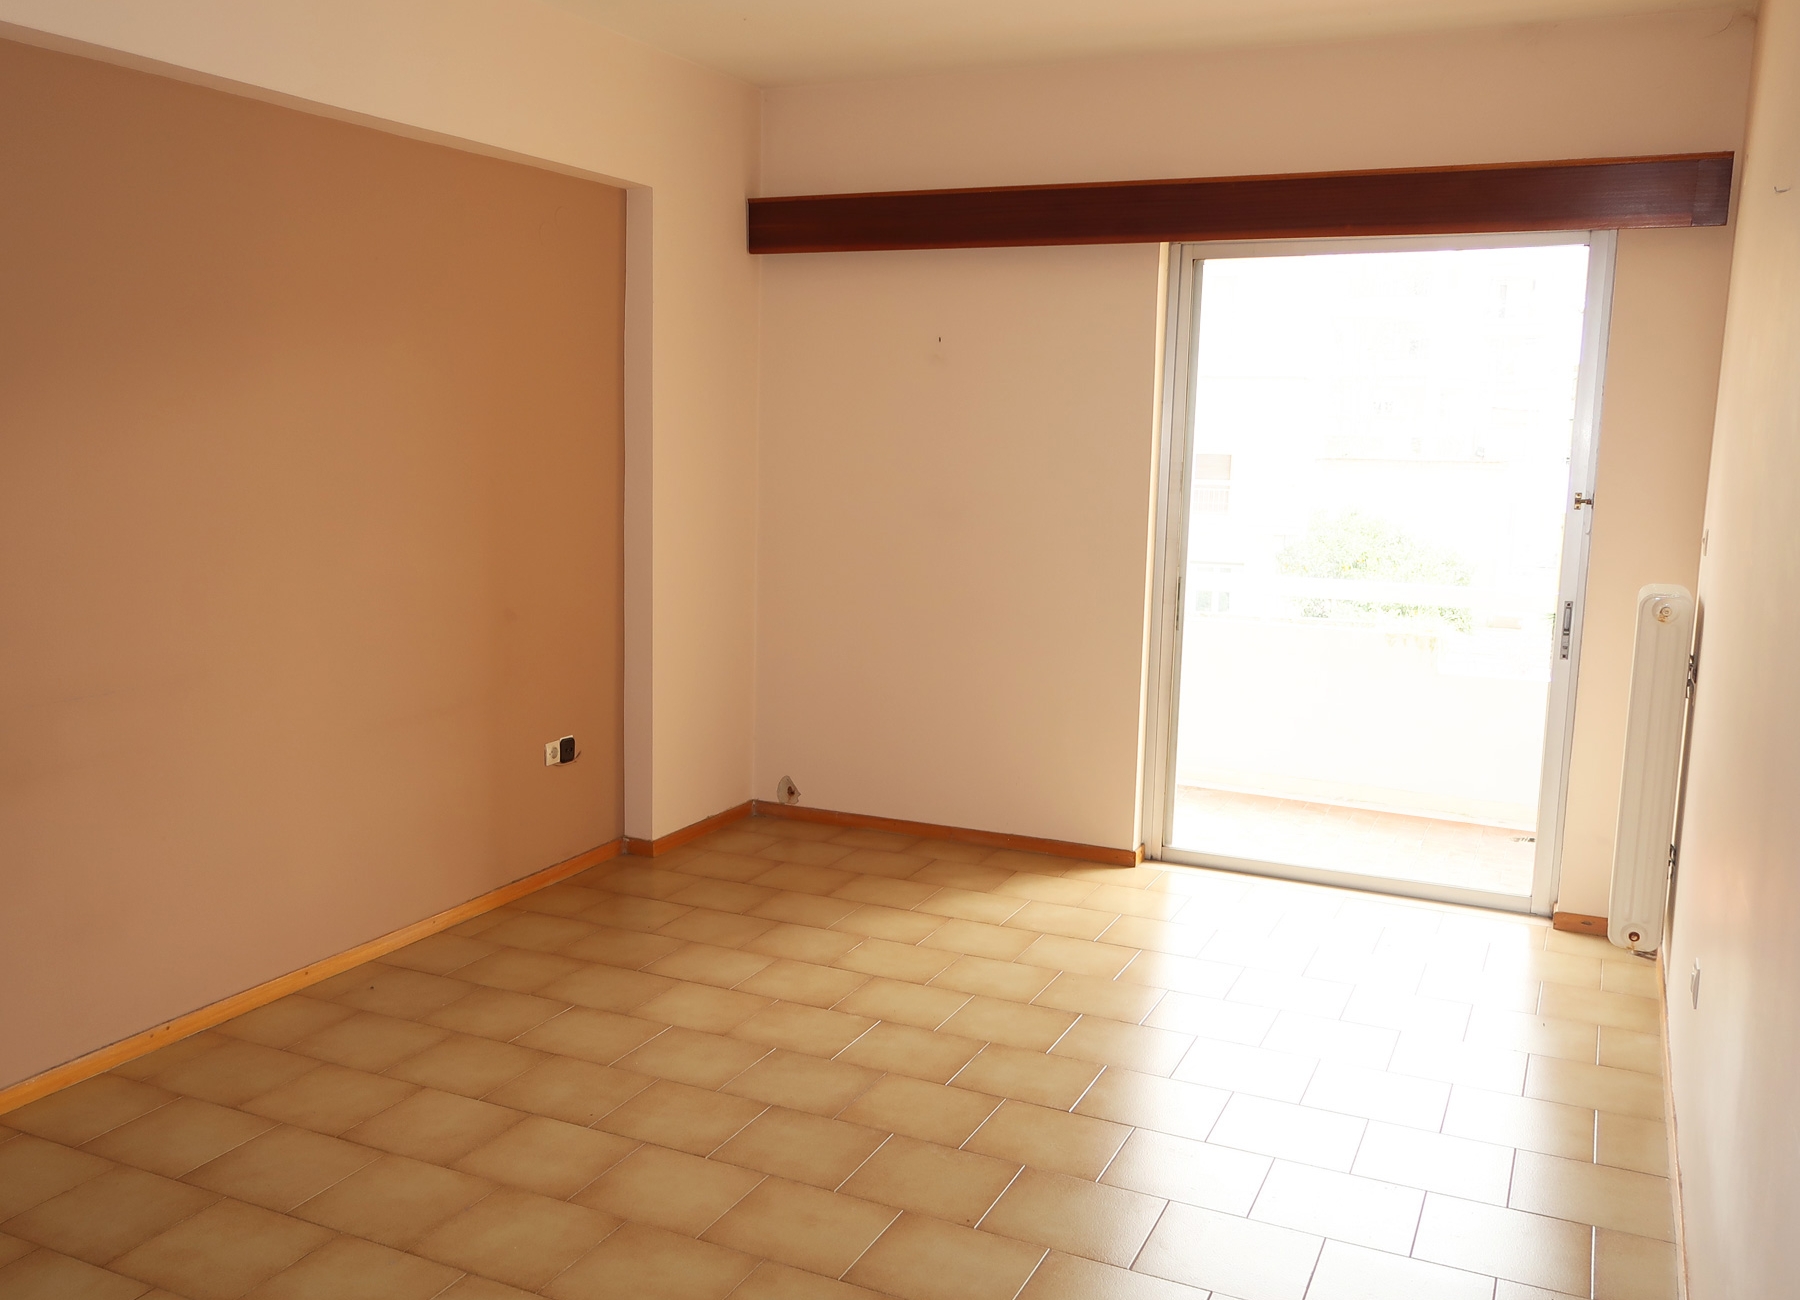 In the center of Ioannina For sale 3 bedroom apartment 102 sq.m. 1st floor near Souliou street in the center of Ioannina 